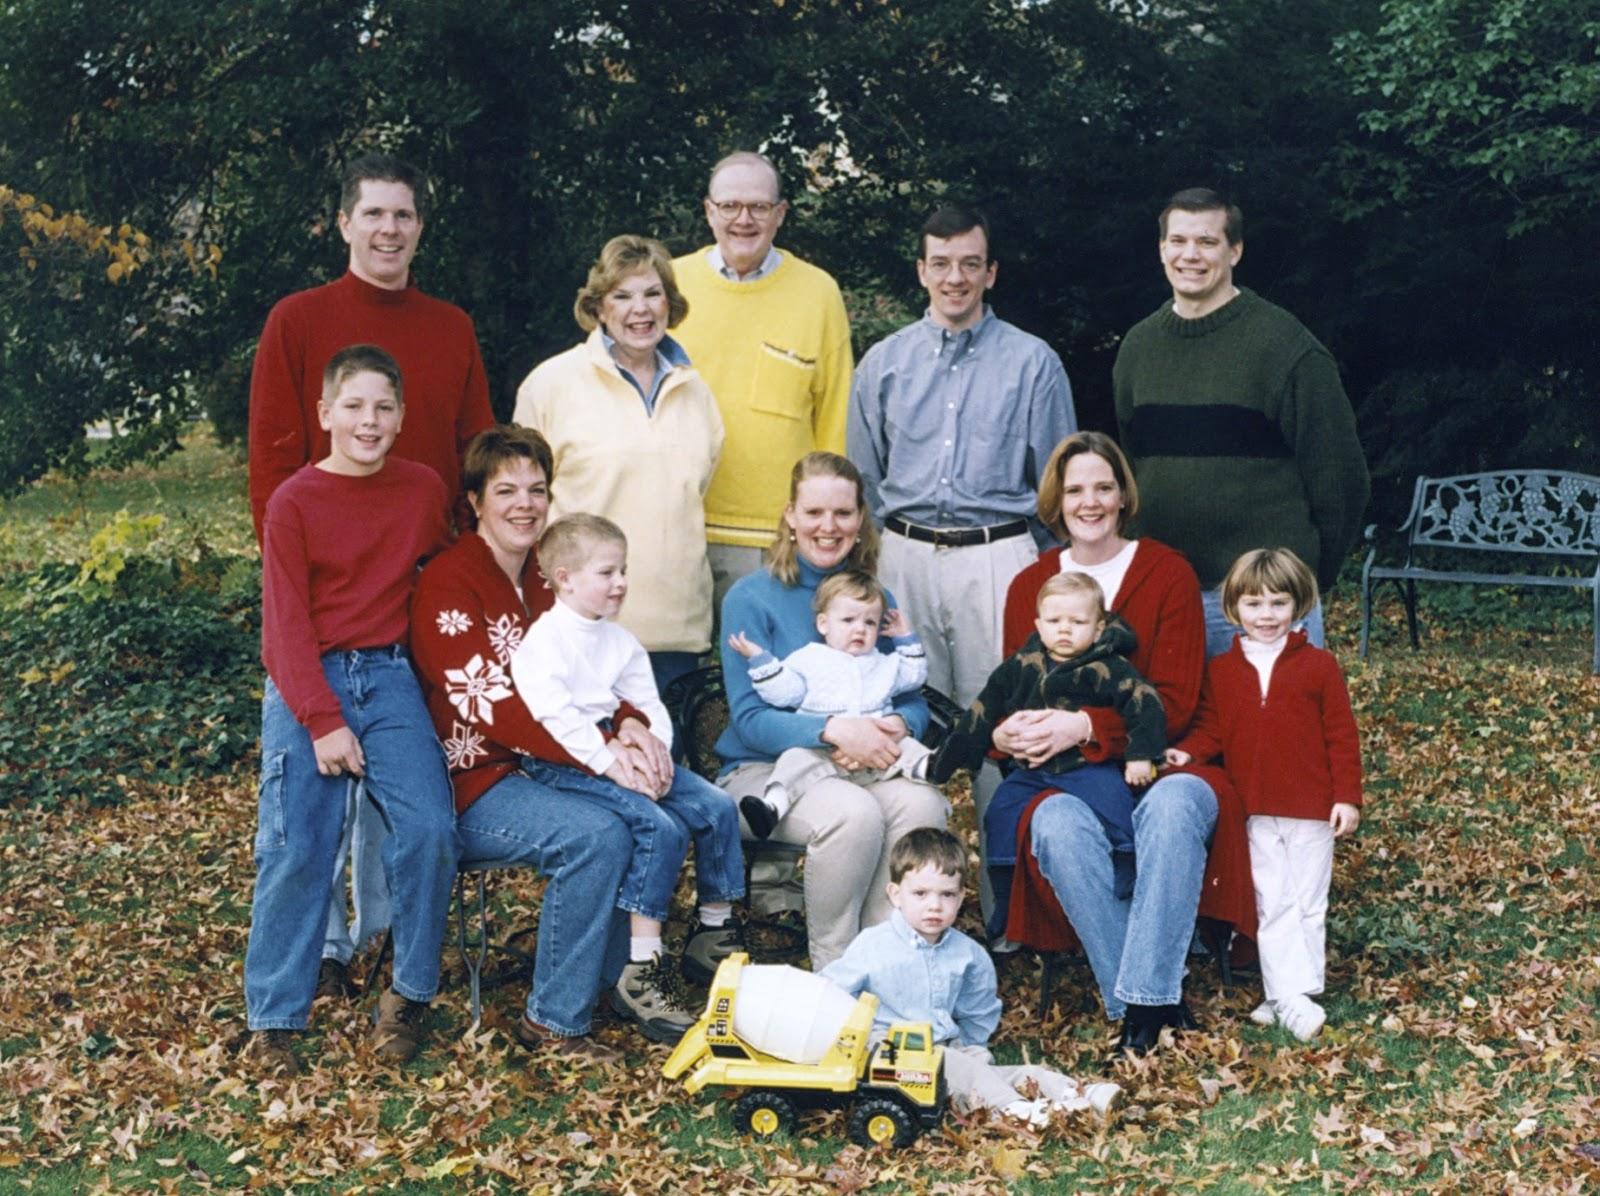 A family photo including Paul Thornwall’s family along with his son in-law Tim Stansel and two of his children (Photo Credit: Tim Stansel)